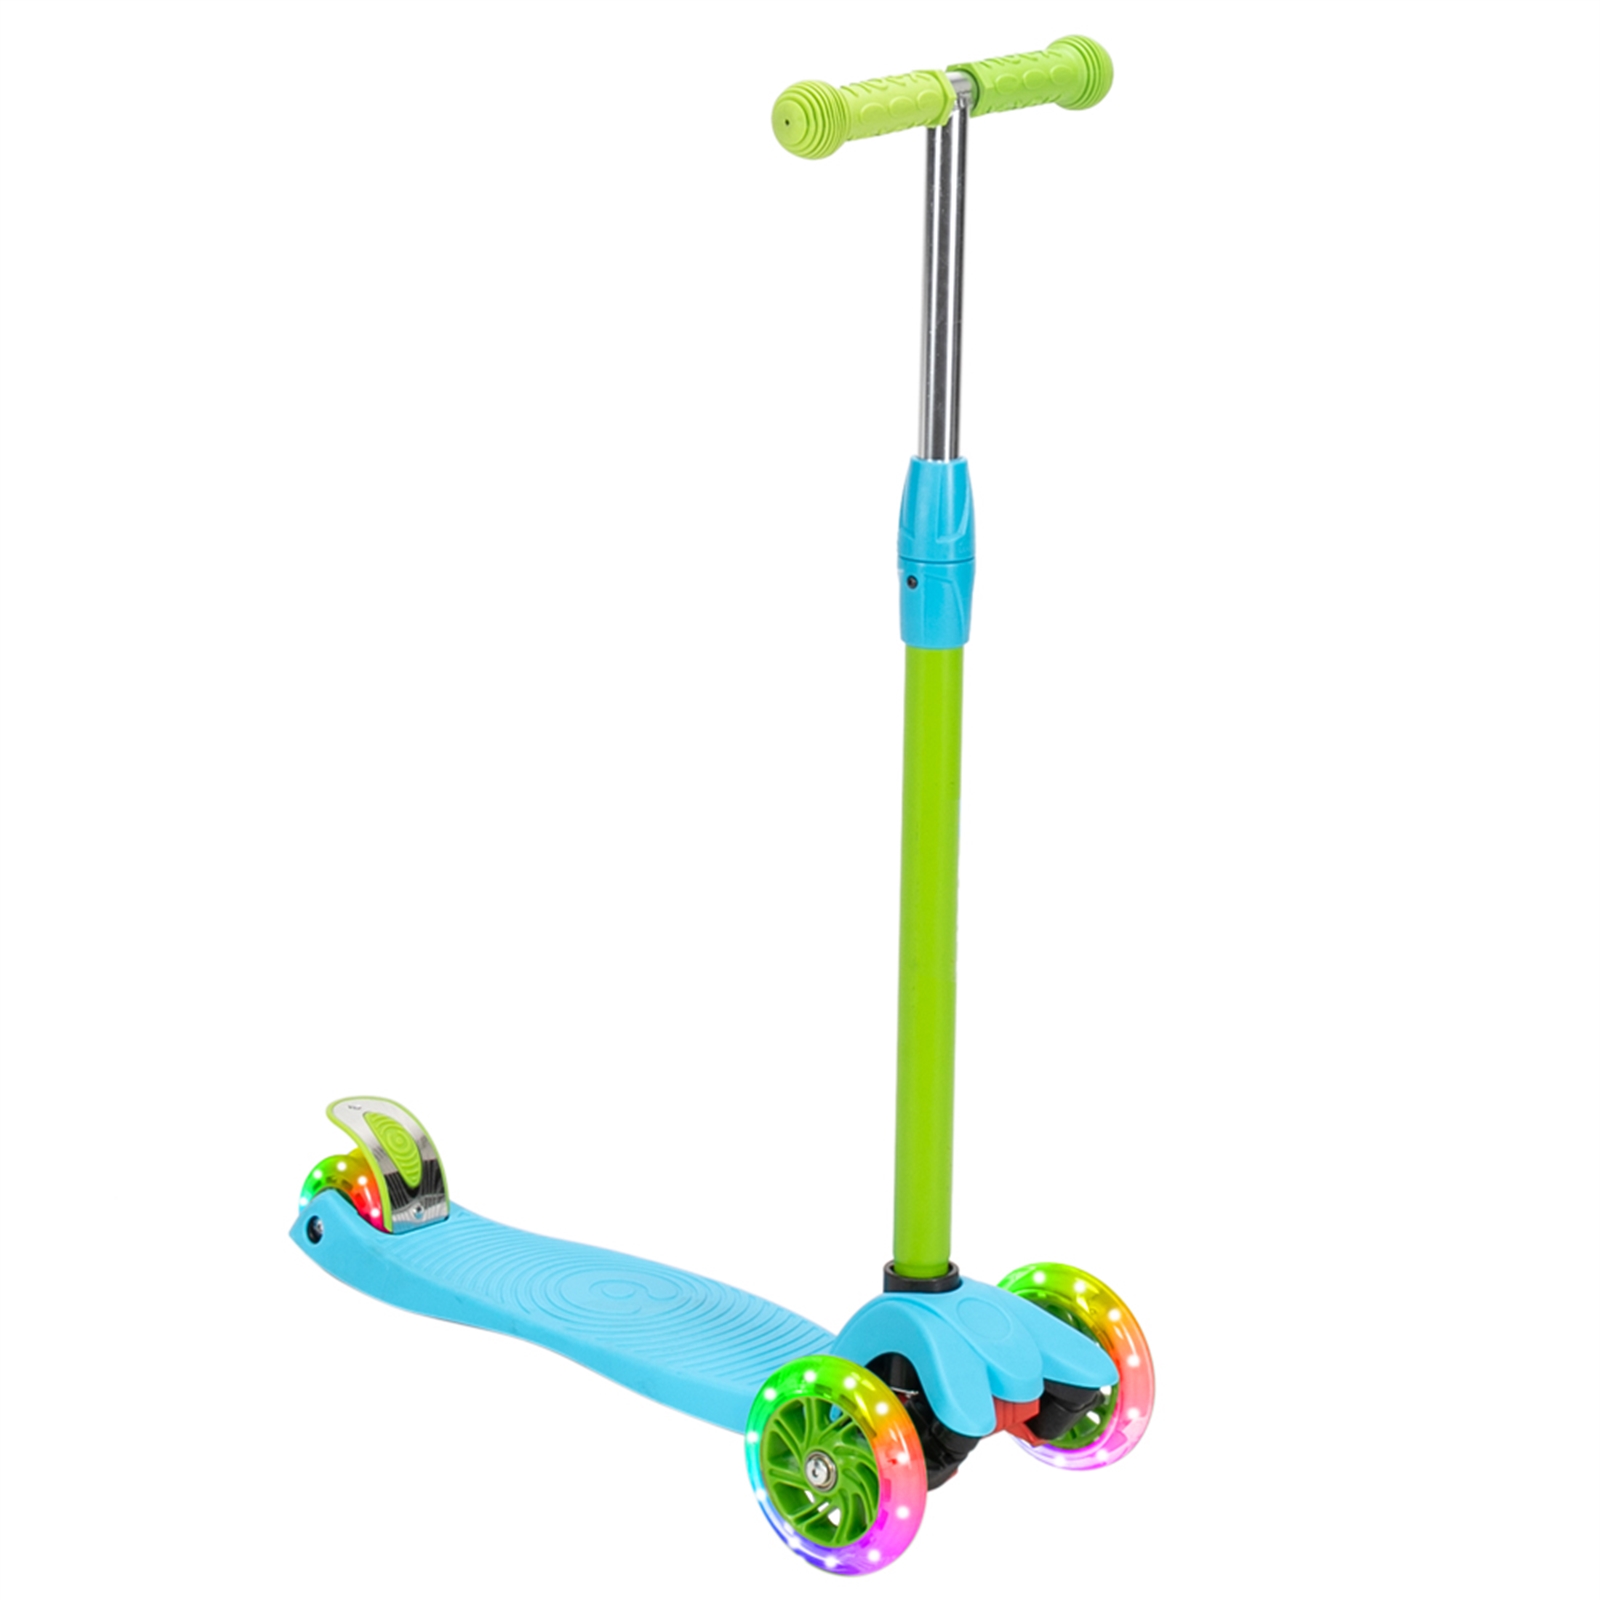 Private Jungle Micro Scooter for Kids 3-12, Mini Sport Scooter with 3 Flashing PU Wheels,Adjustable Height,Aluminum-Alloy Frame,Toddler Scooter for Boys/Girls,Green and Blue - image 1 of 10